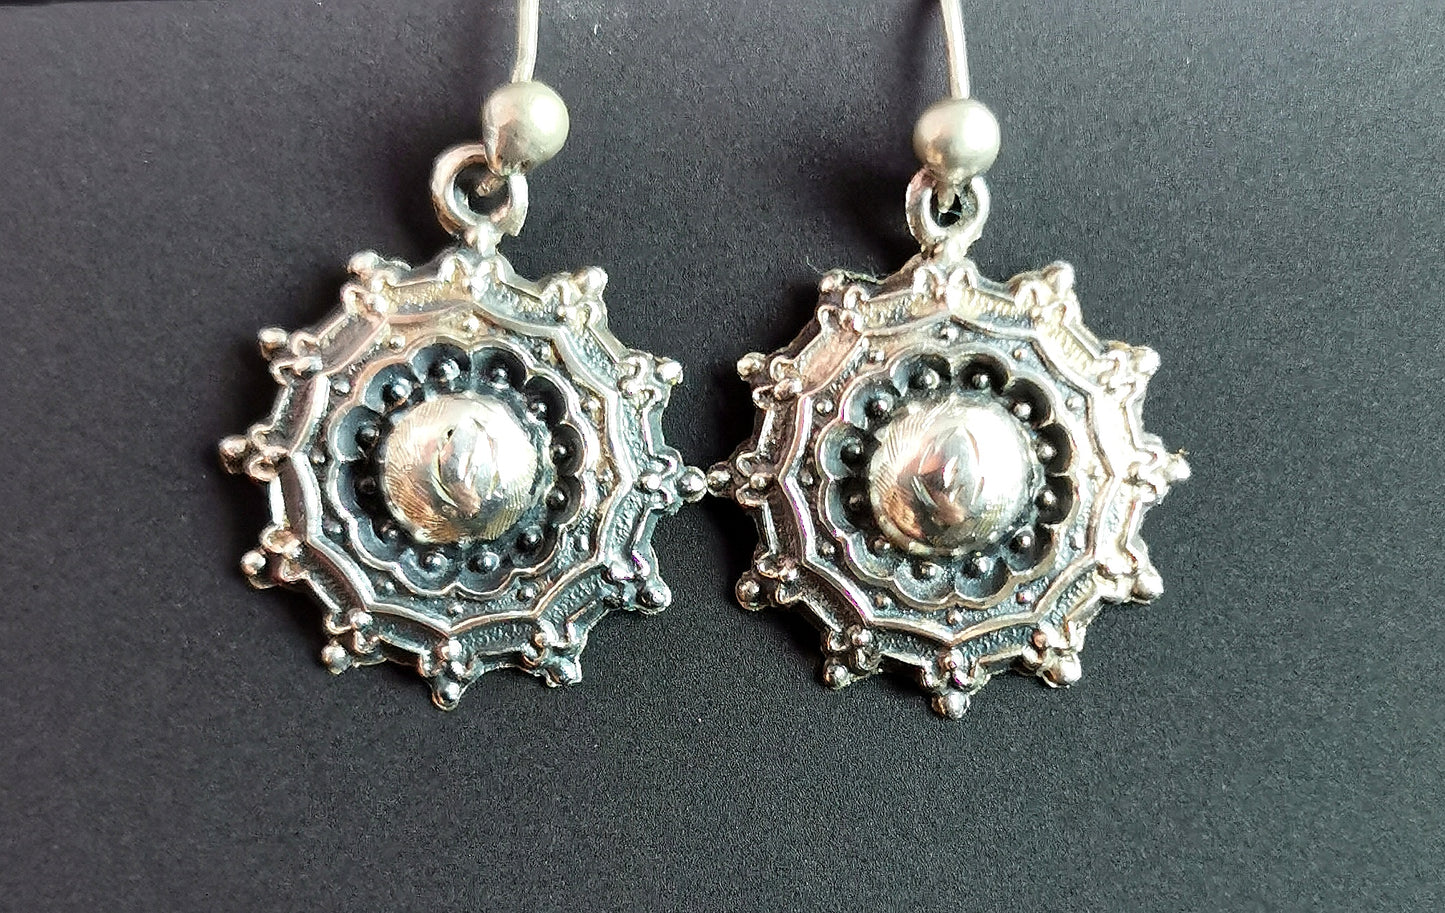 Antique Victorian silver target earrings